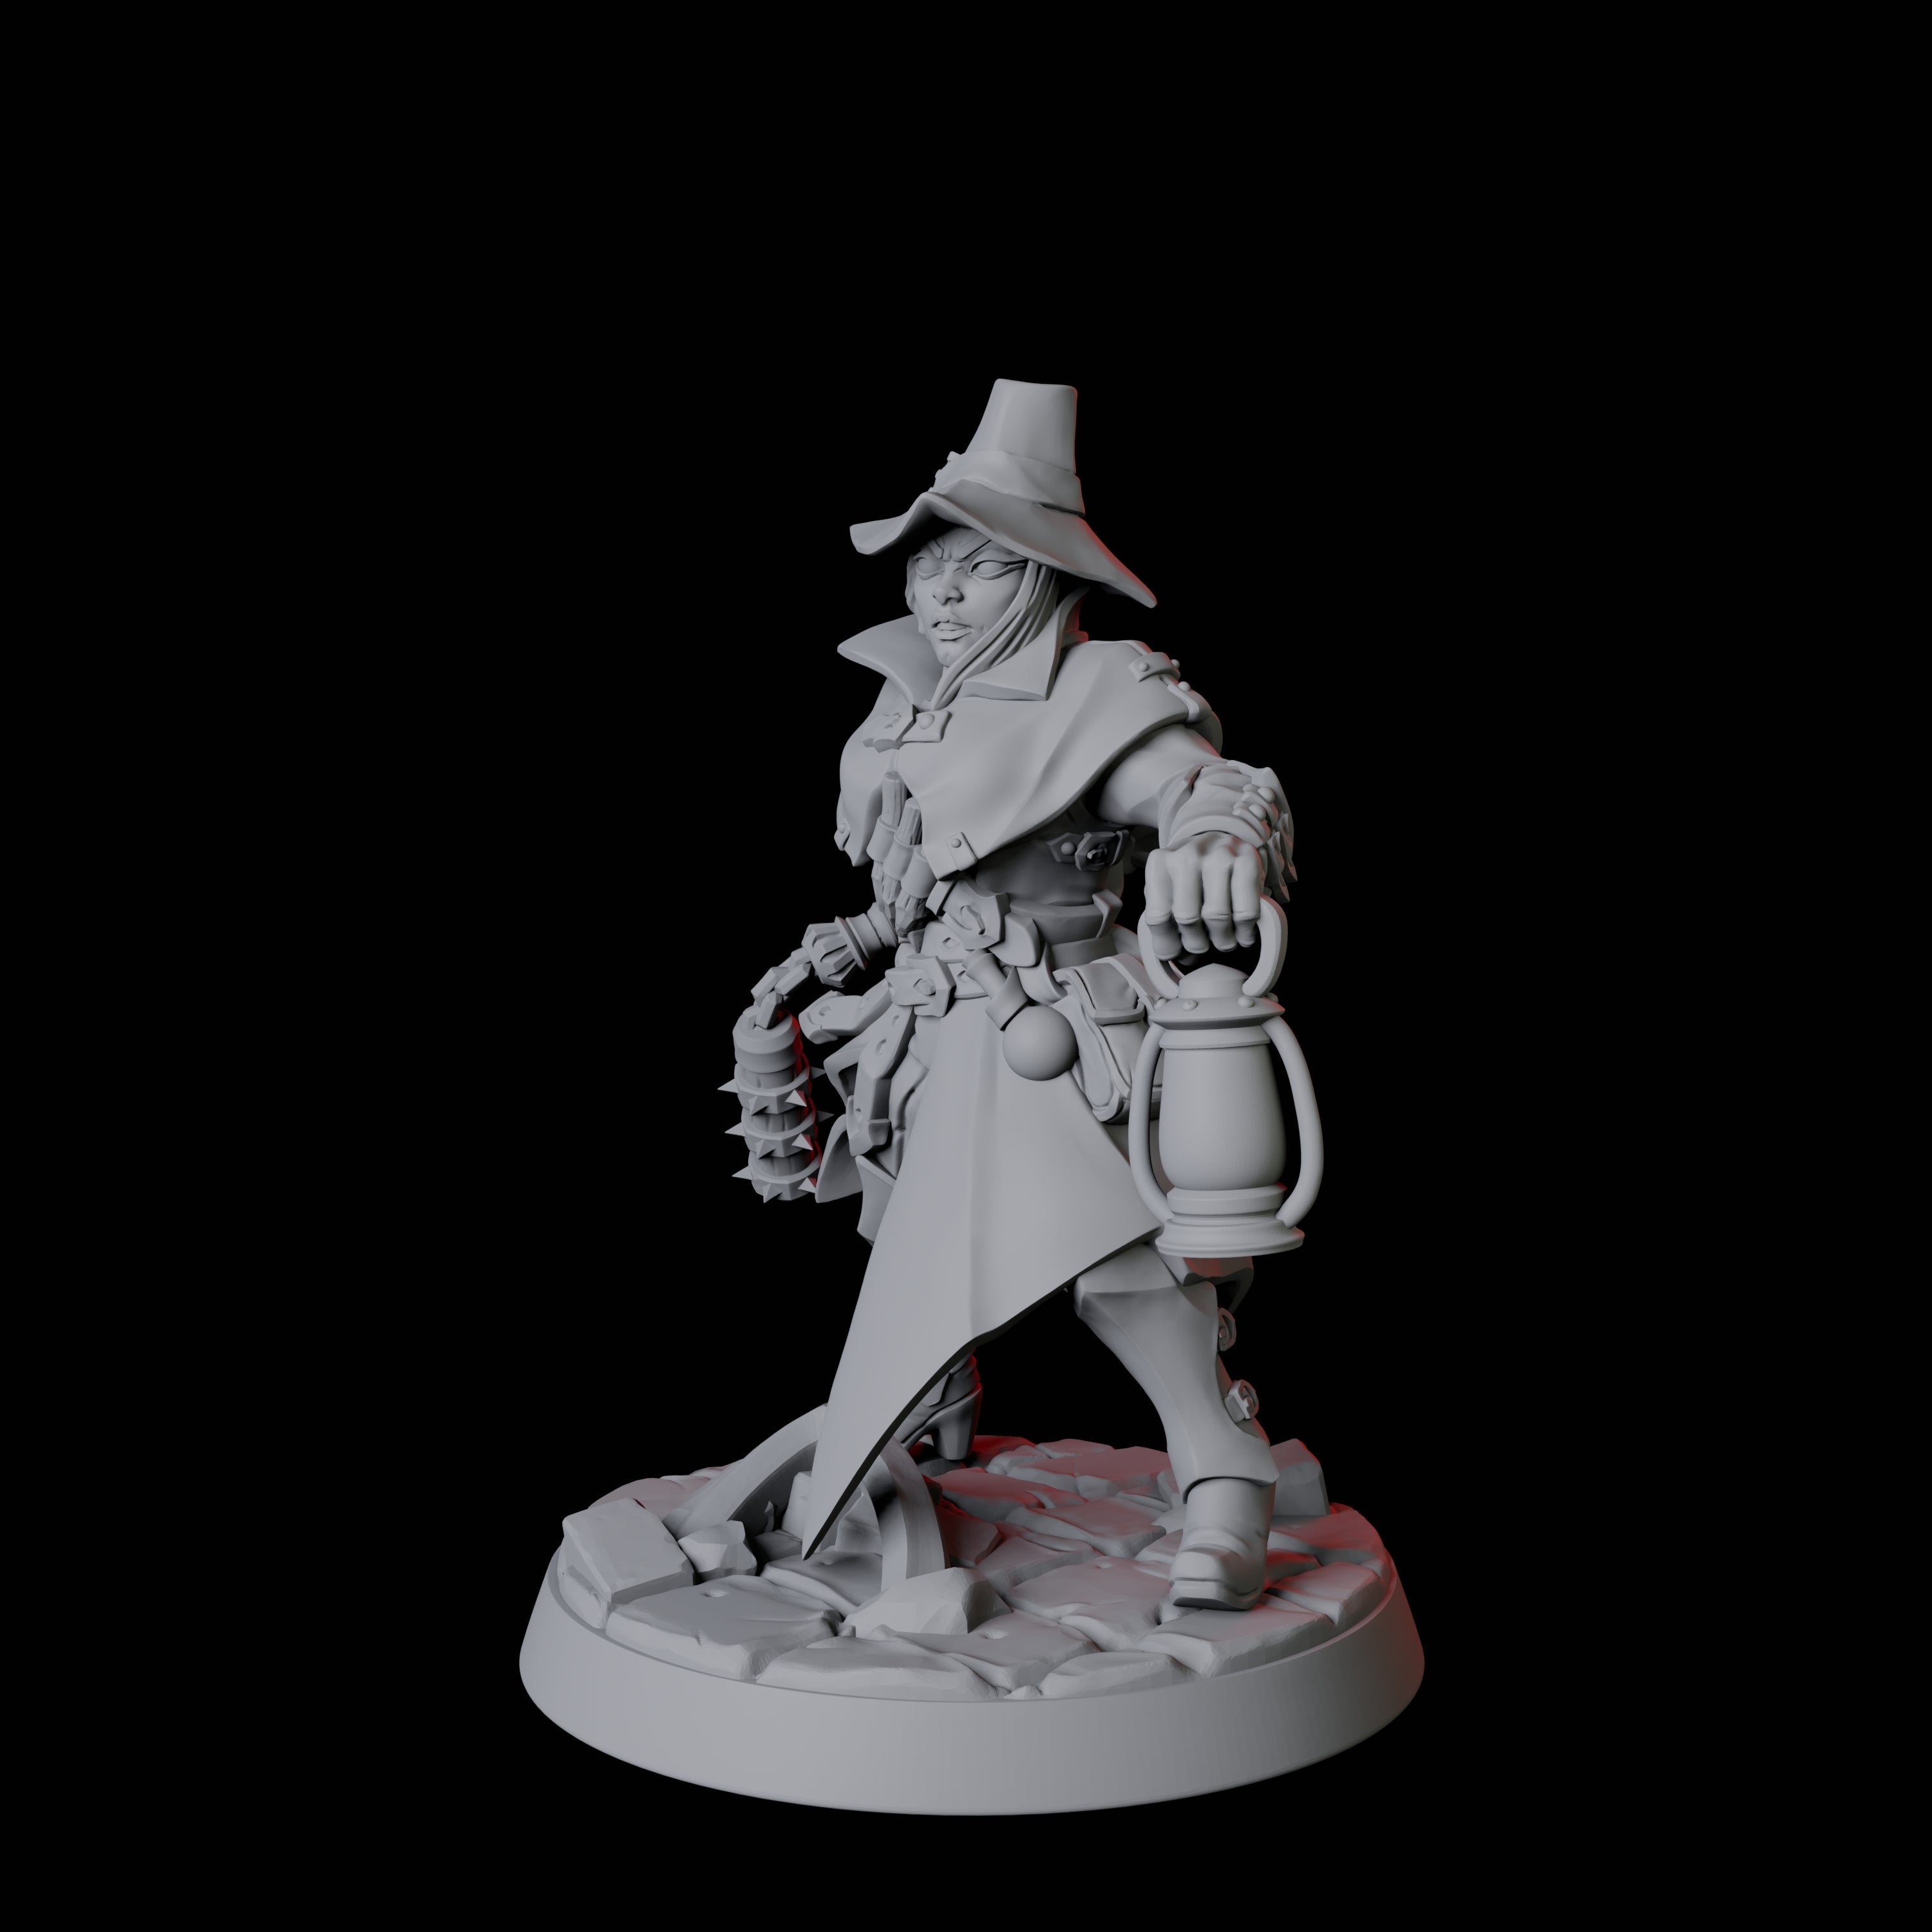 Vampire Hunter D Miniature for Dungeons and Dragons, Pathfinder or other TTRPGs